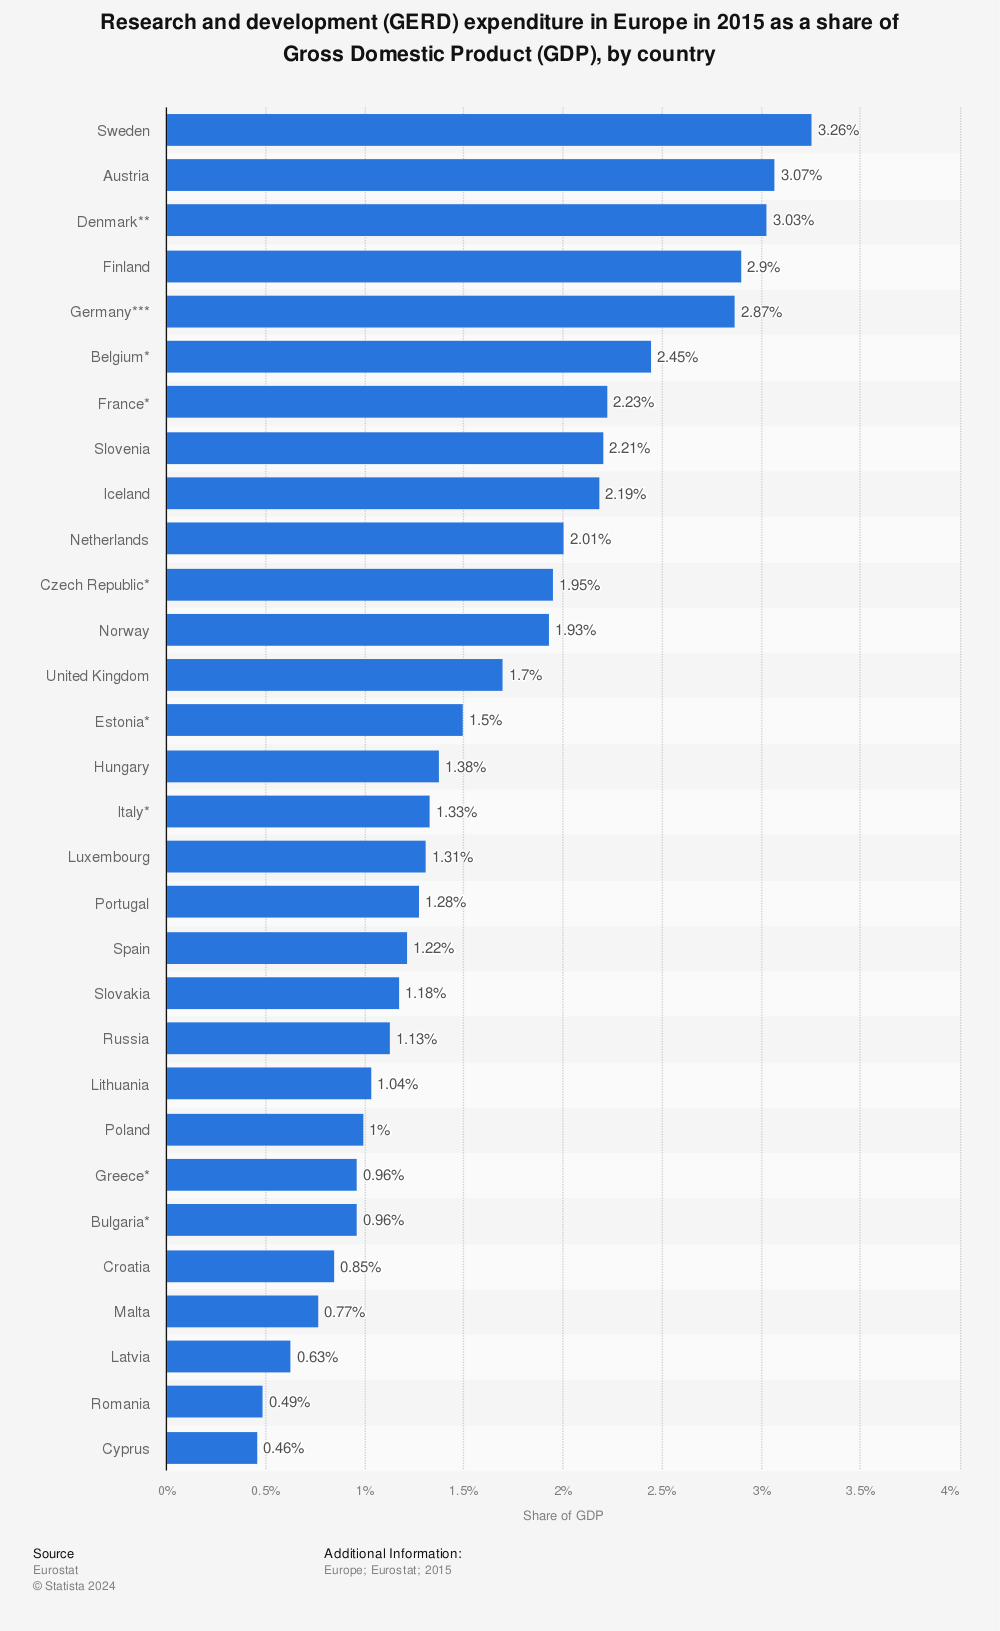 Statistic: Research and development (GERD) expenditure in Europe in 2015 as a share of Gross Domestic Product (GDP), by country | Statista